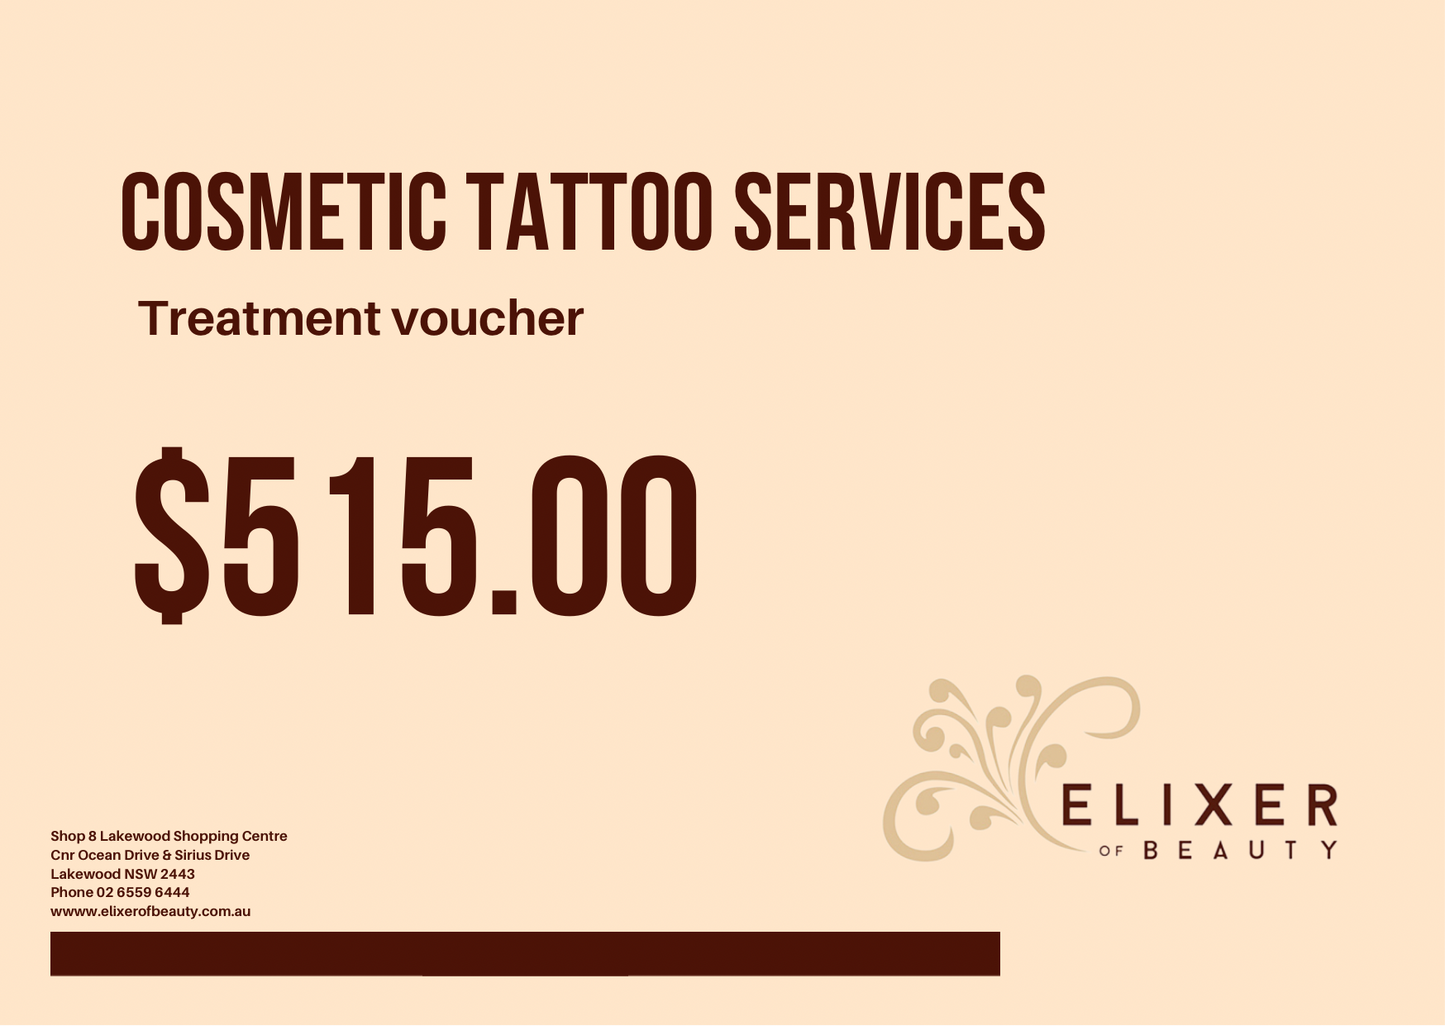 COSMETIC TATTOO SERVICES TREATMENT